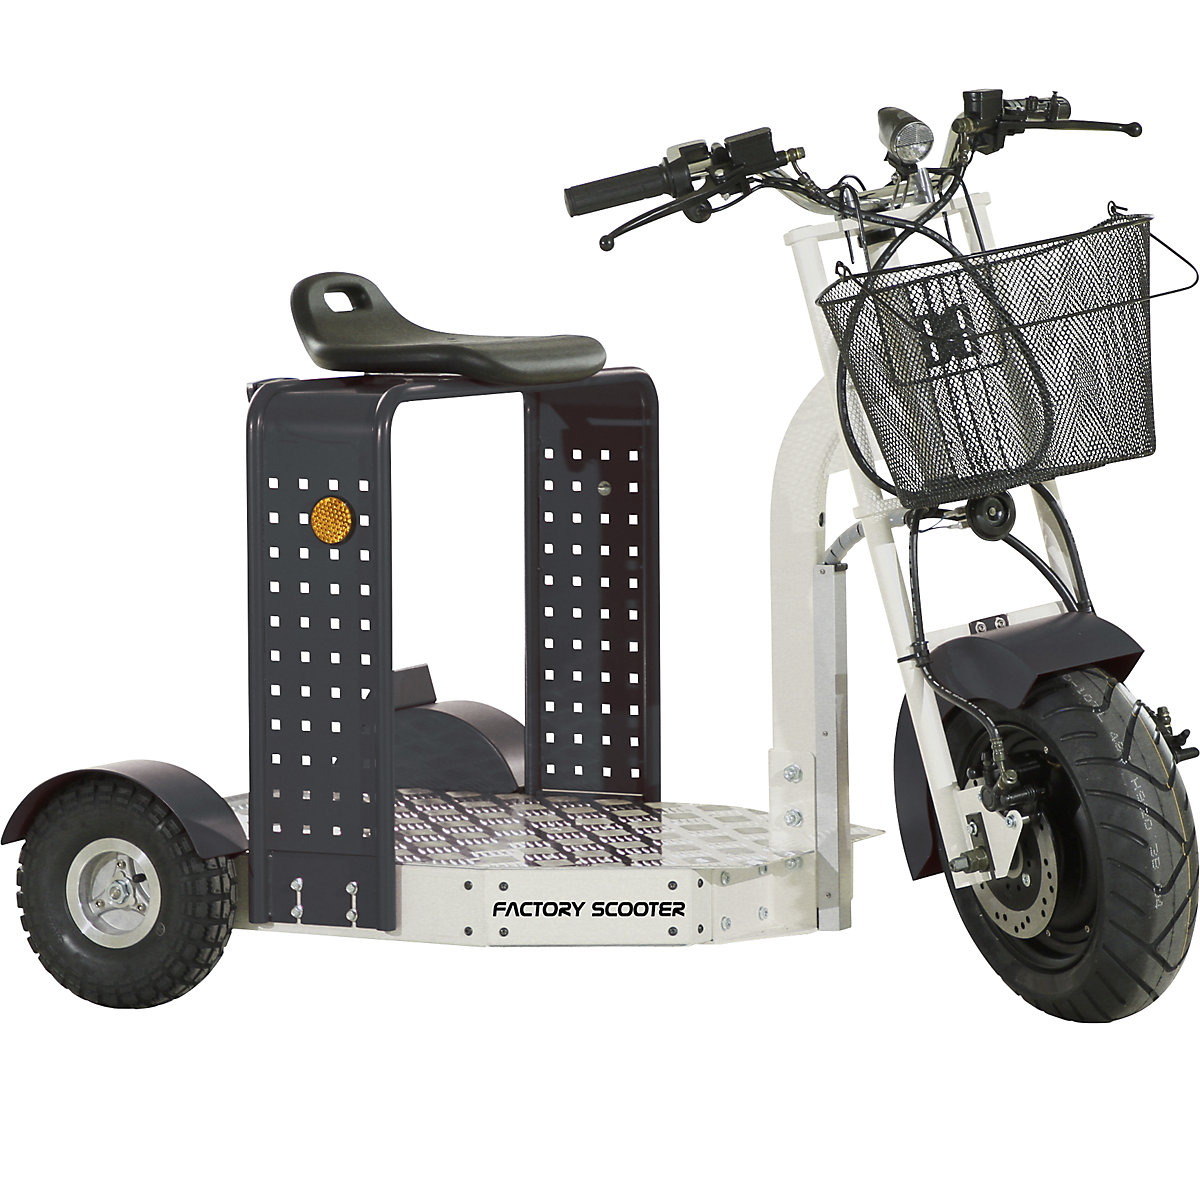 Factory Scooter (Productafbeelding 4)-3